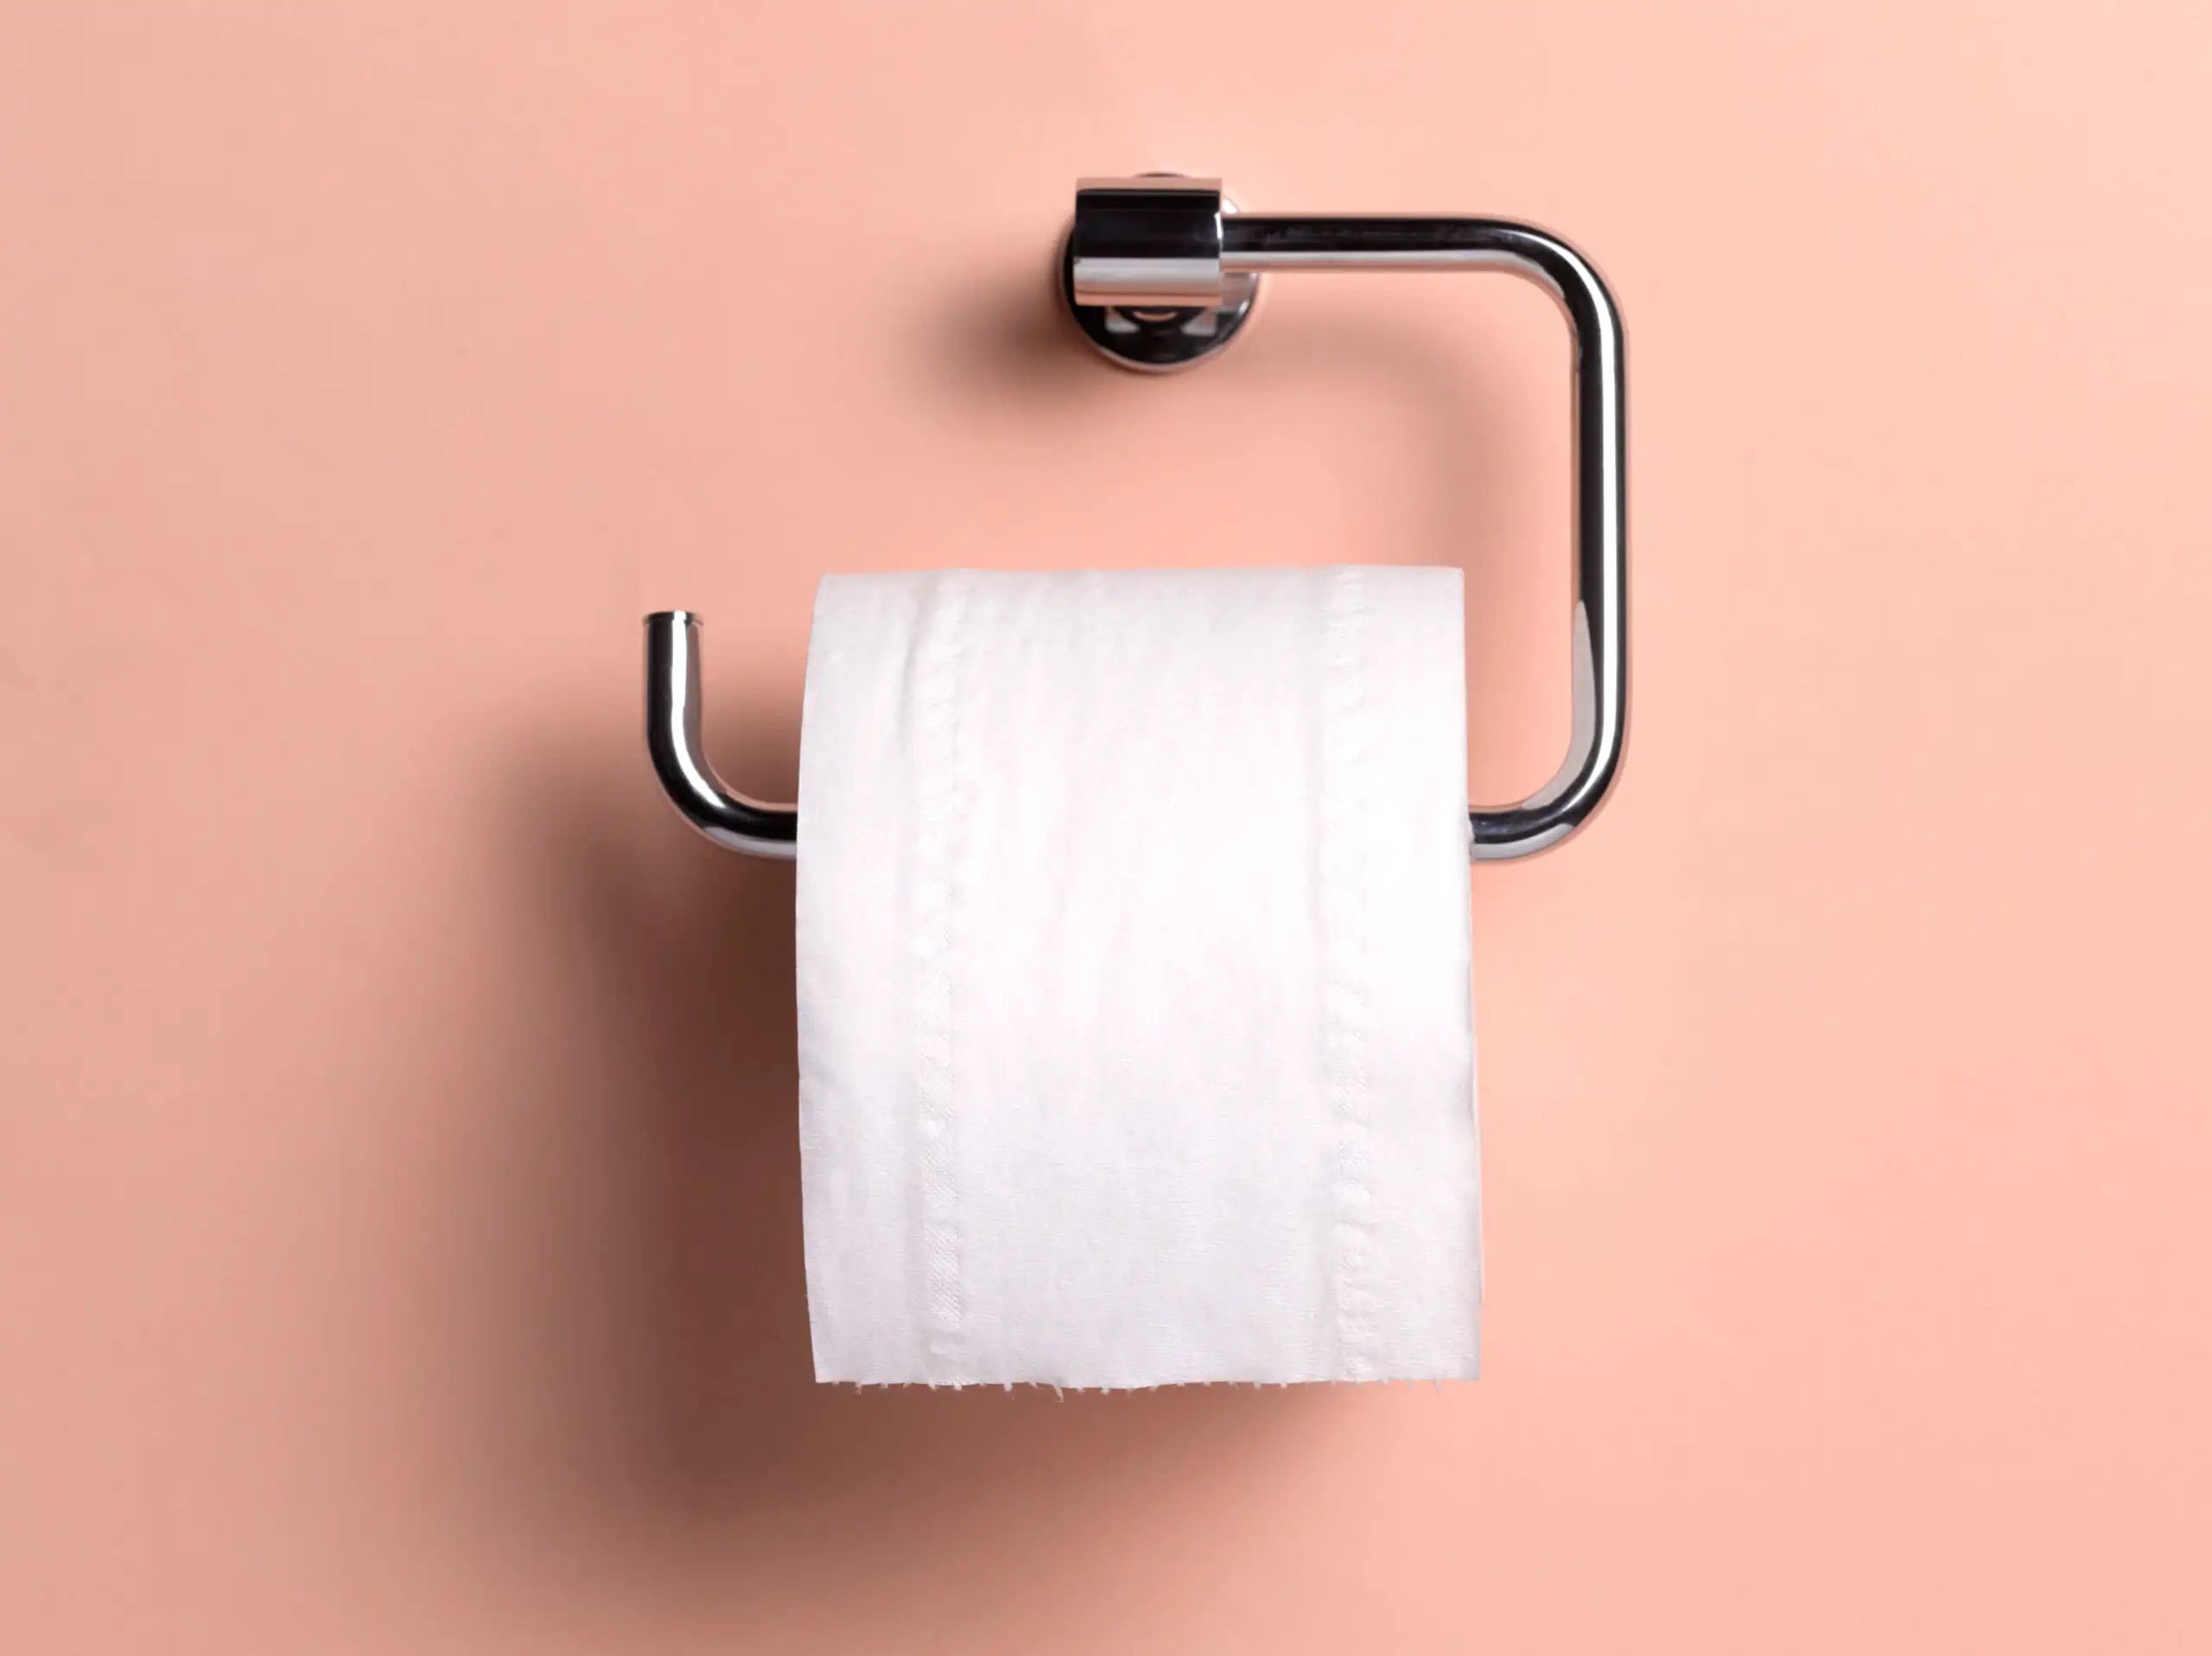 Social Dilemma: Who should change the toilet paper roll when it runs out?